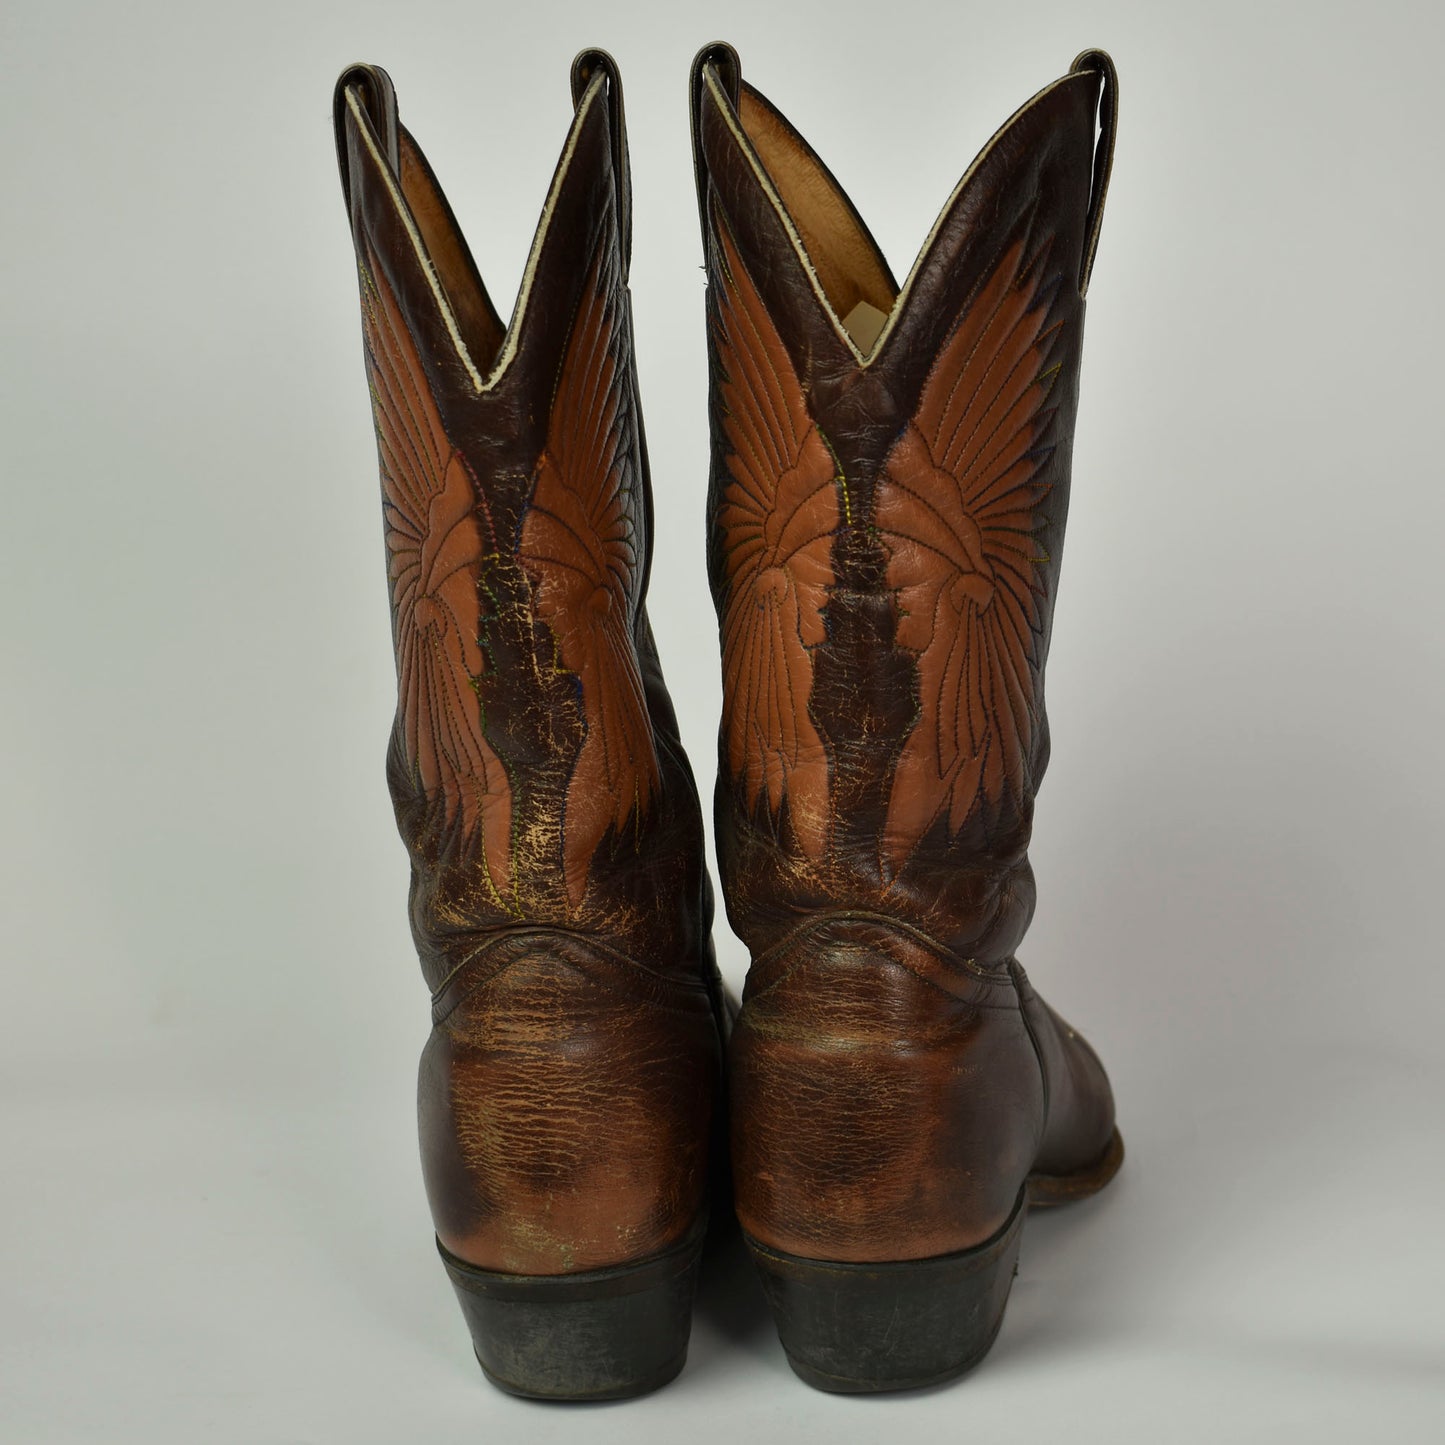 Vintage 80s Boulet Leather Western Cowboy Indian Rockabilly Size 7 Boots